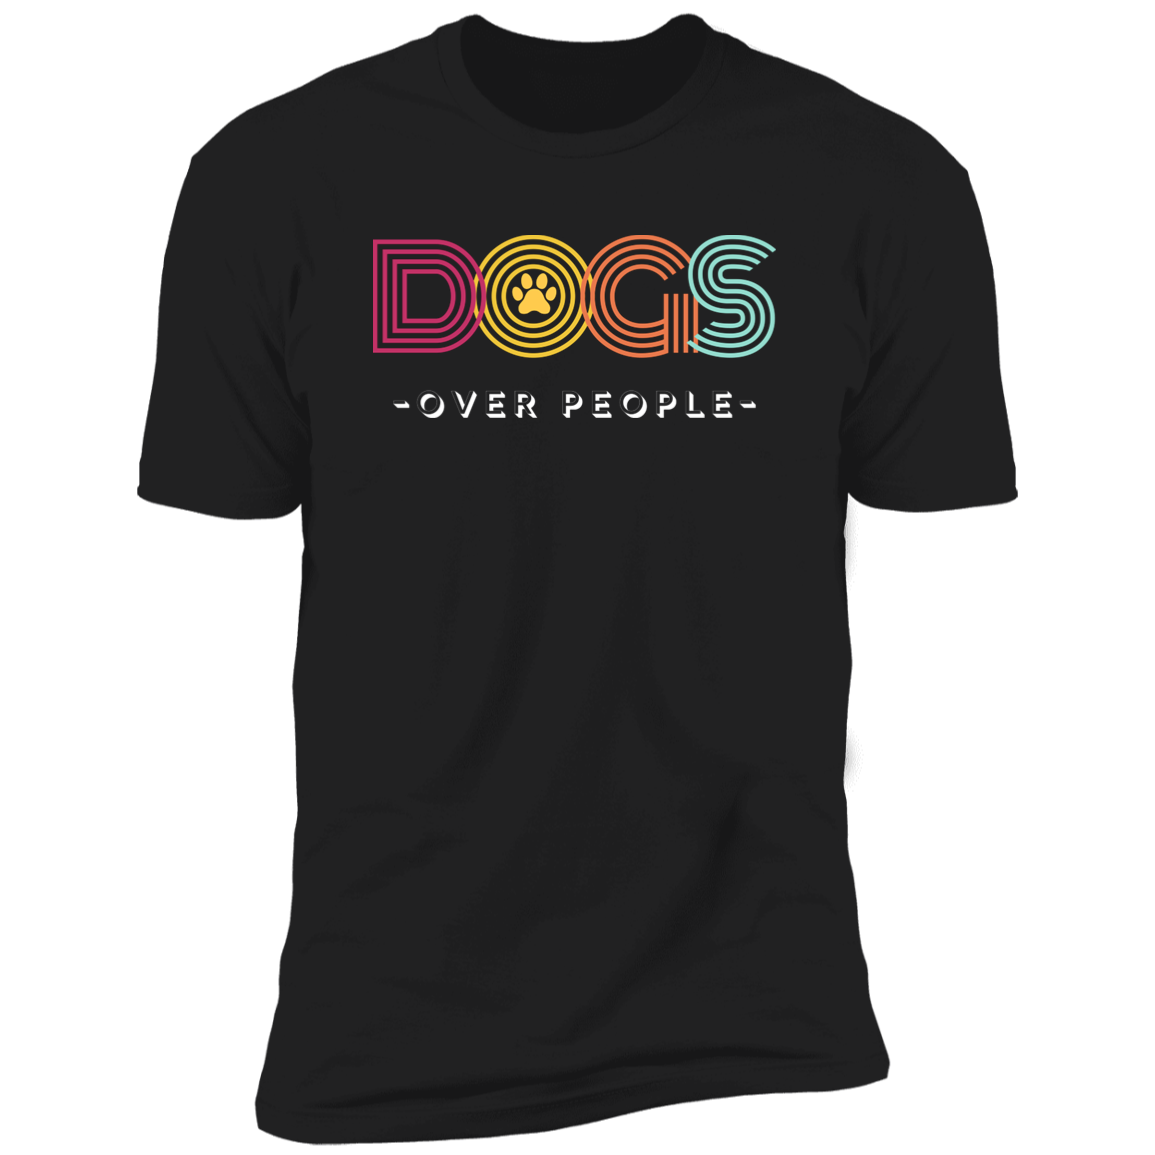 Dogs Over People t-shirt, funny dog shirt for humans, in black